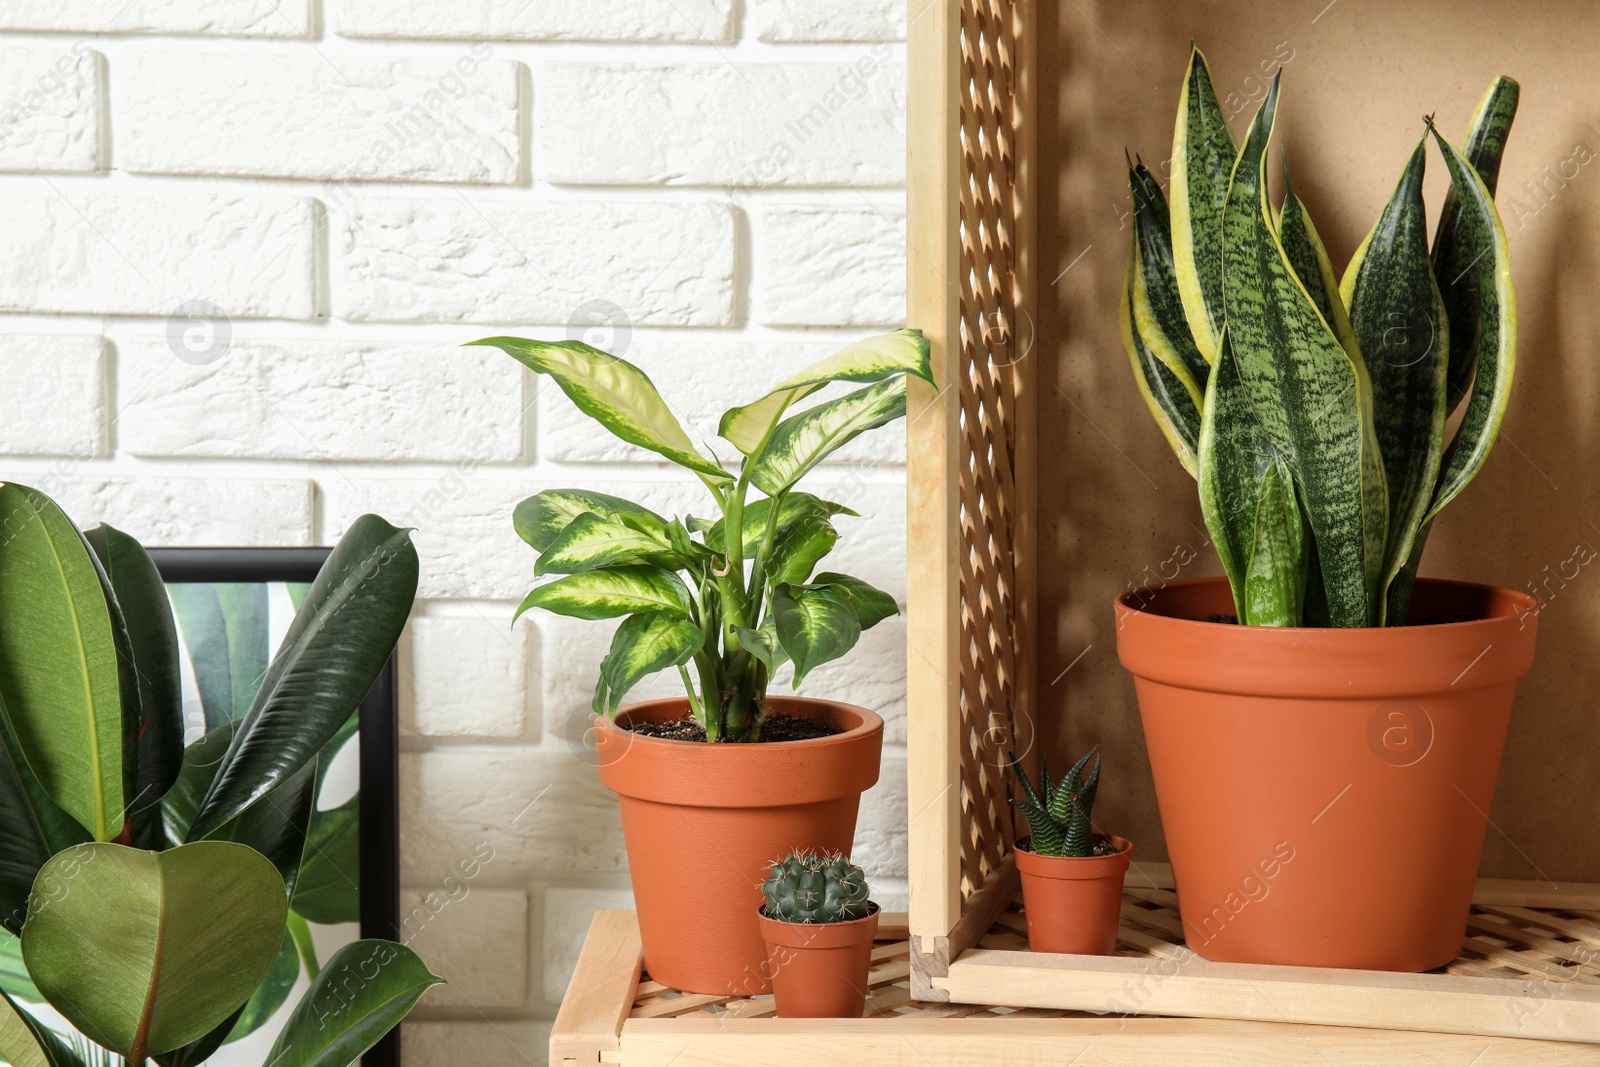 Photo of Potted home plants and wooden crates against brick wall